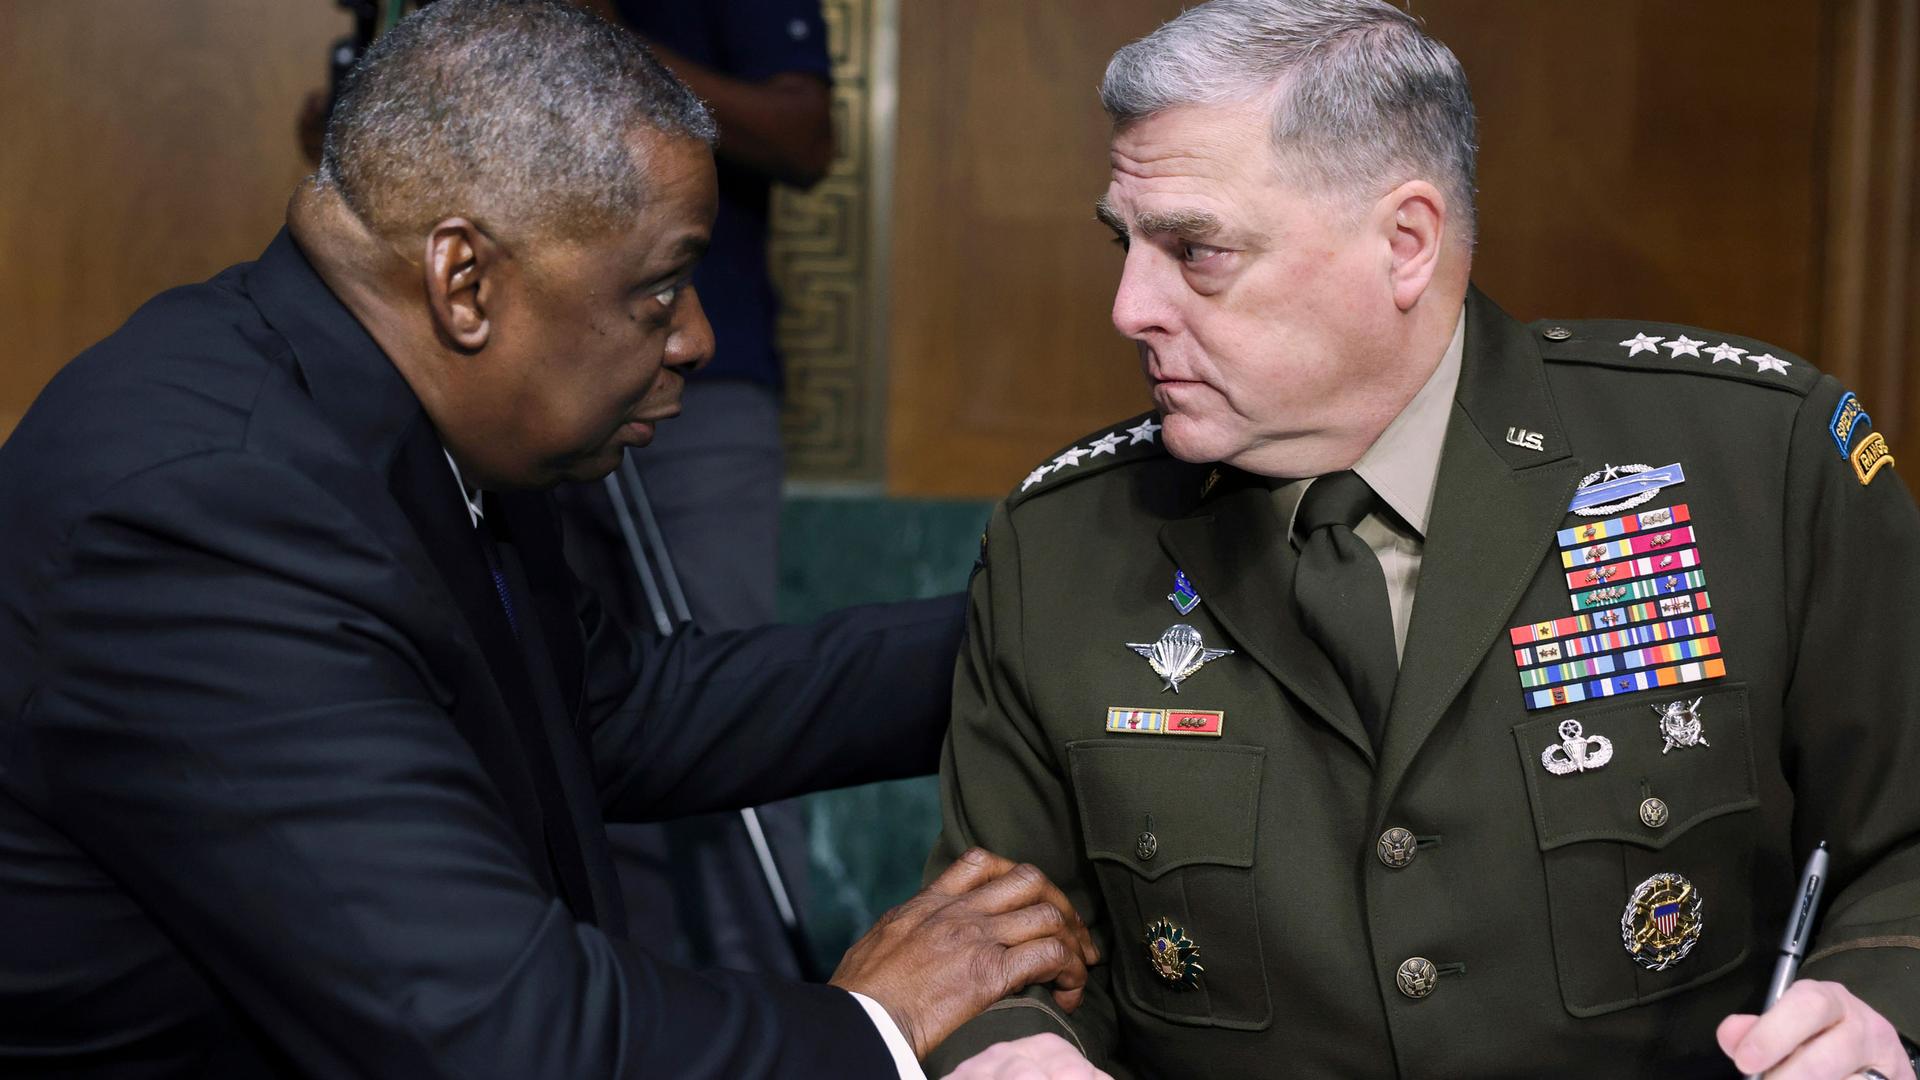 Secretary of Defense Lloyd Austin and Chairman of the Joint Chiefs Chairman Gen. Mark Milley are shown sitting and facing each other.